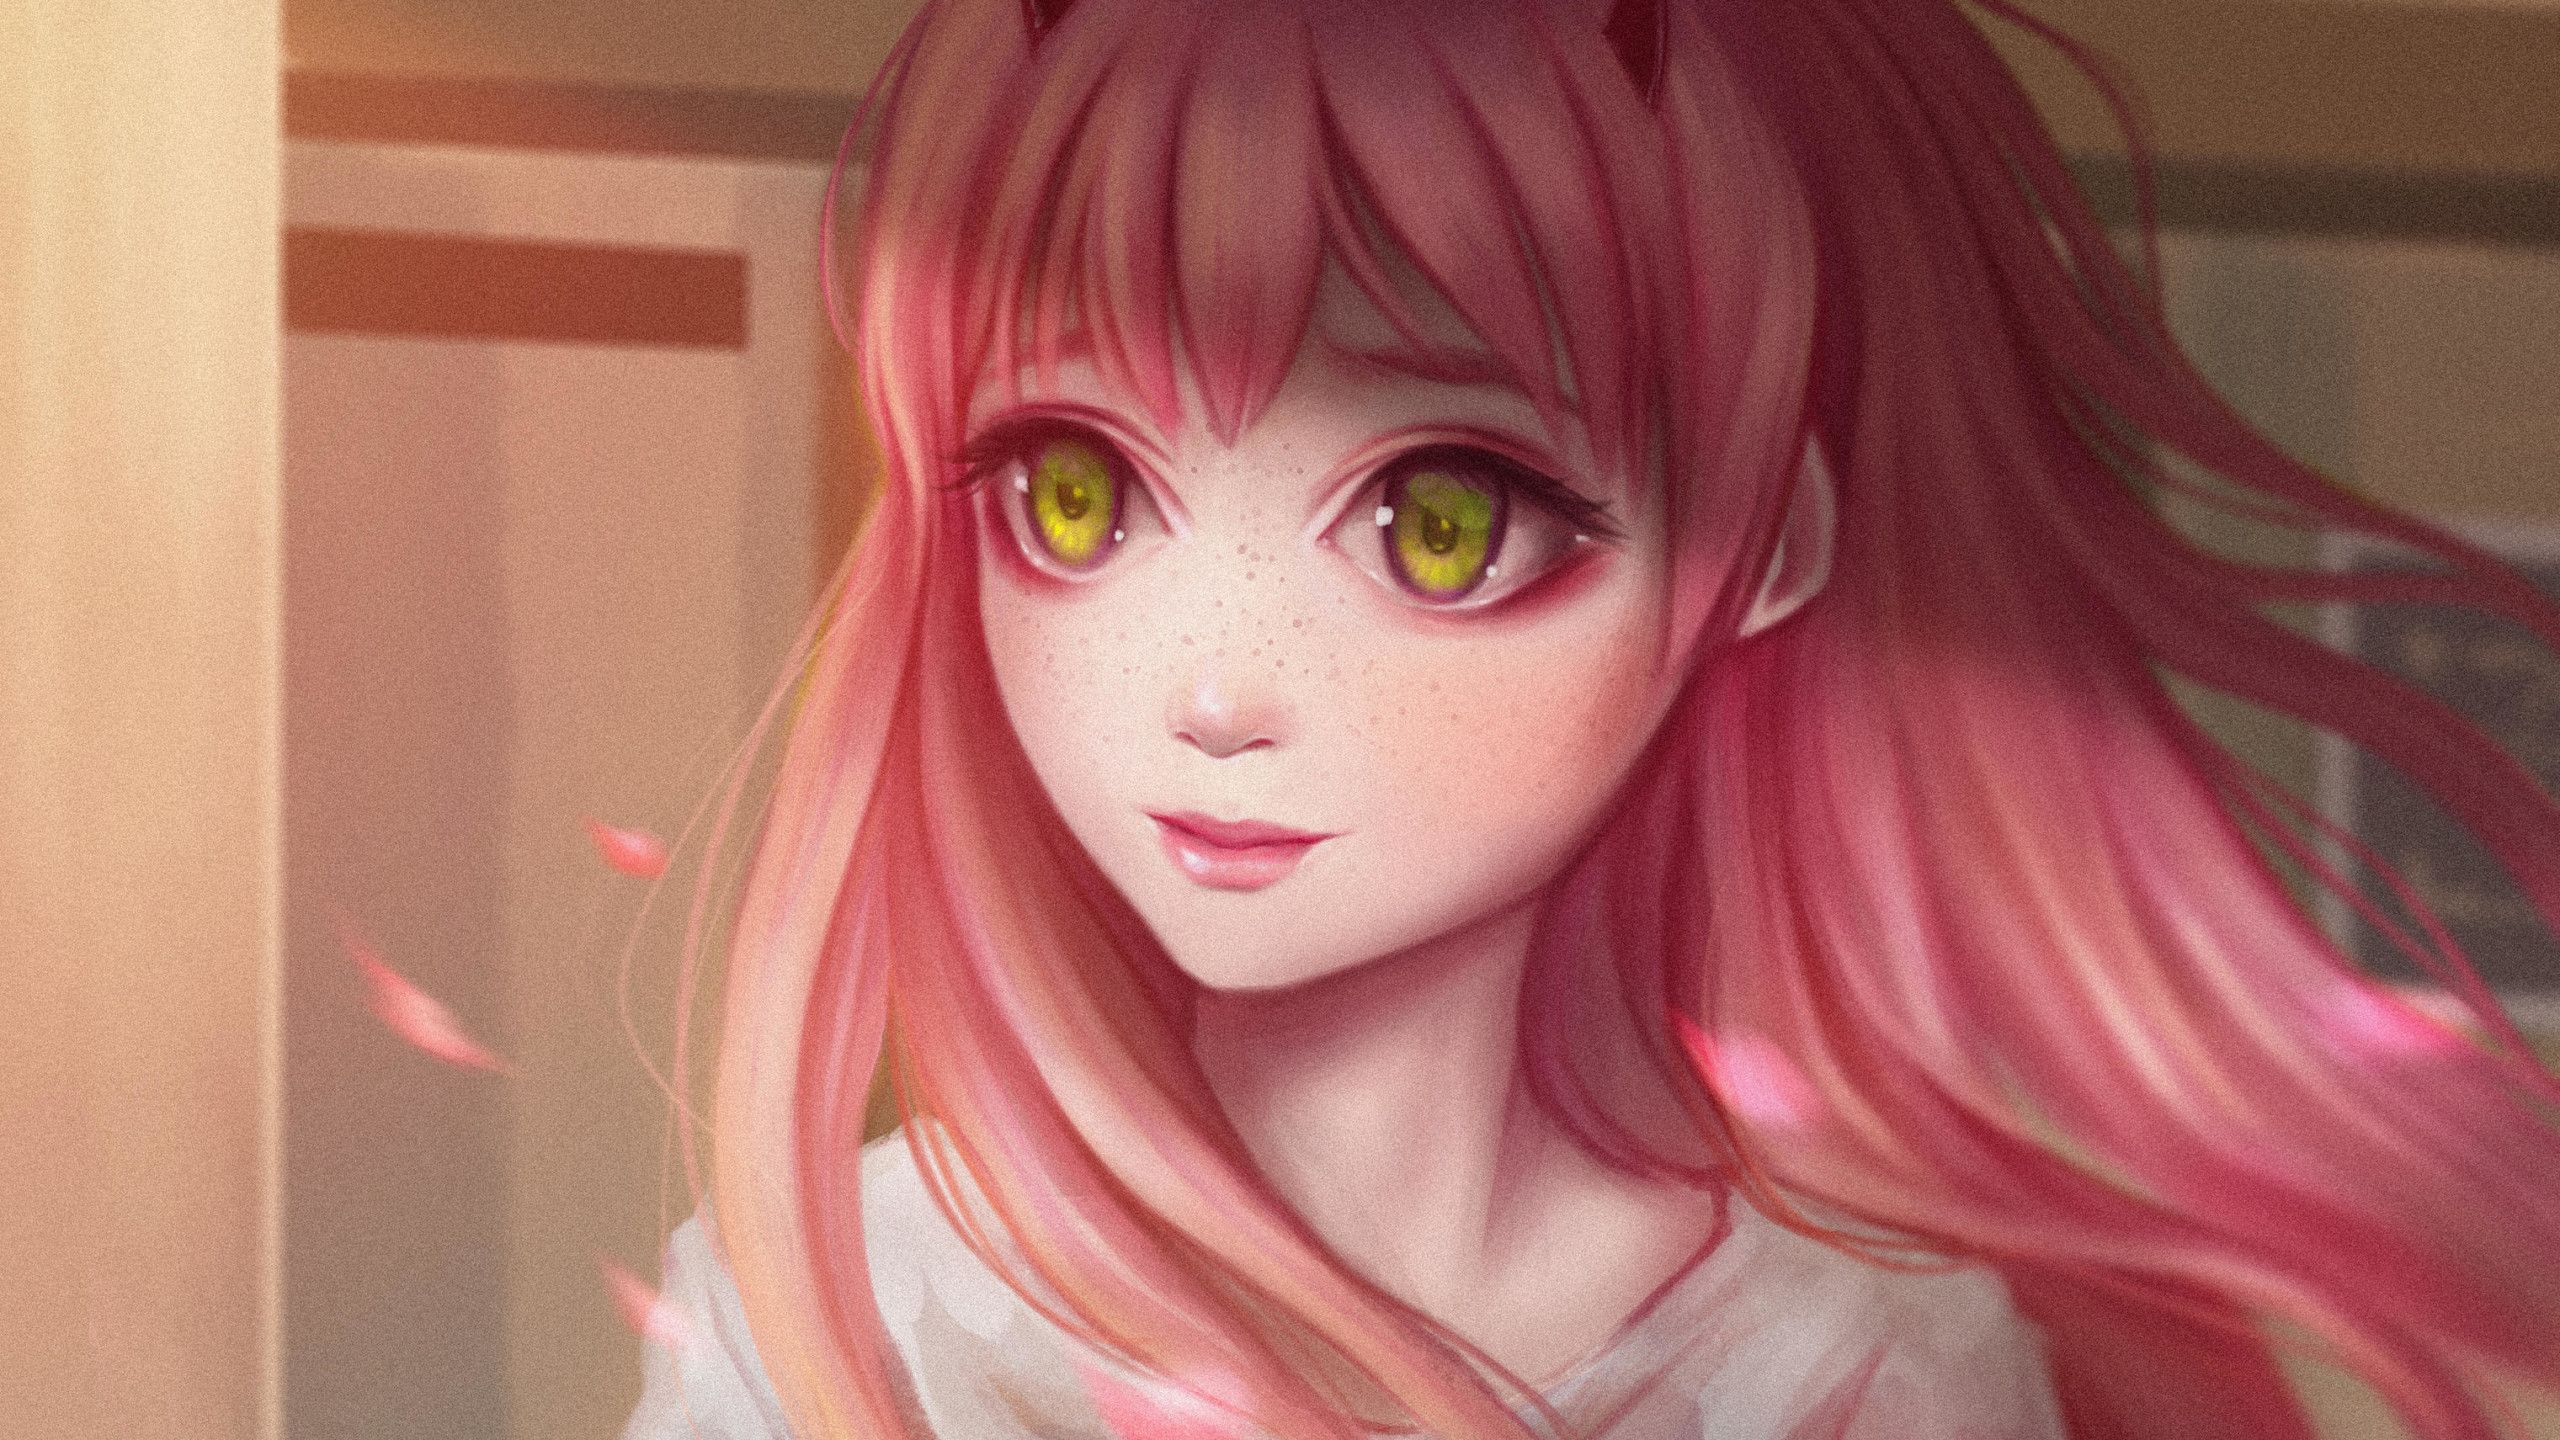 Cute Anime Girl Pink Hairs Red Eyes 1440P Resolution HD